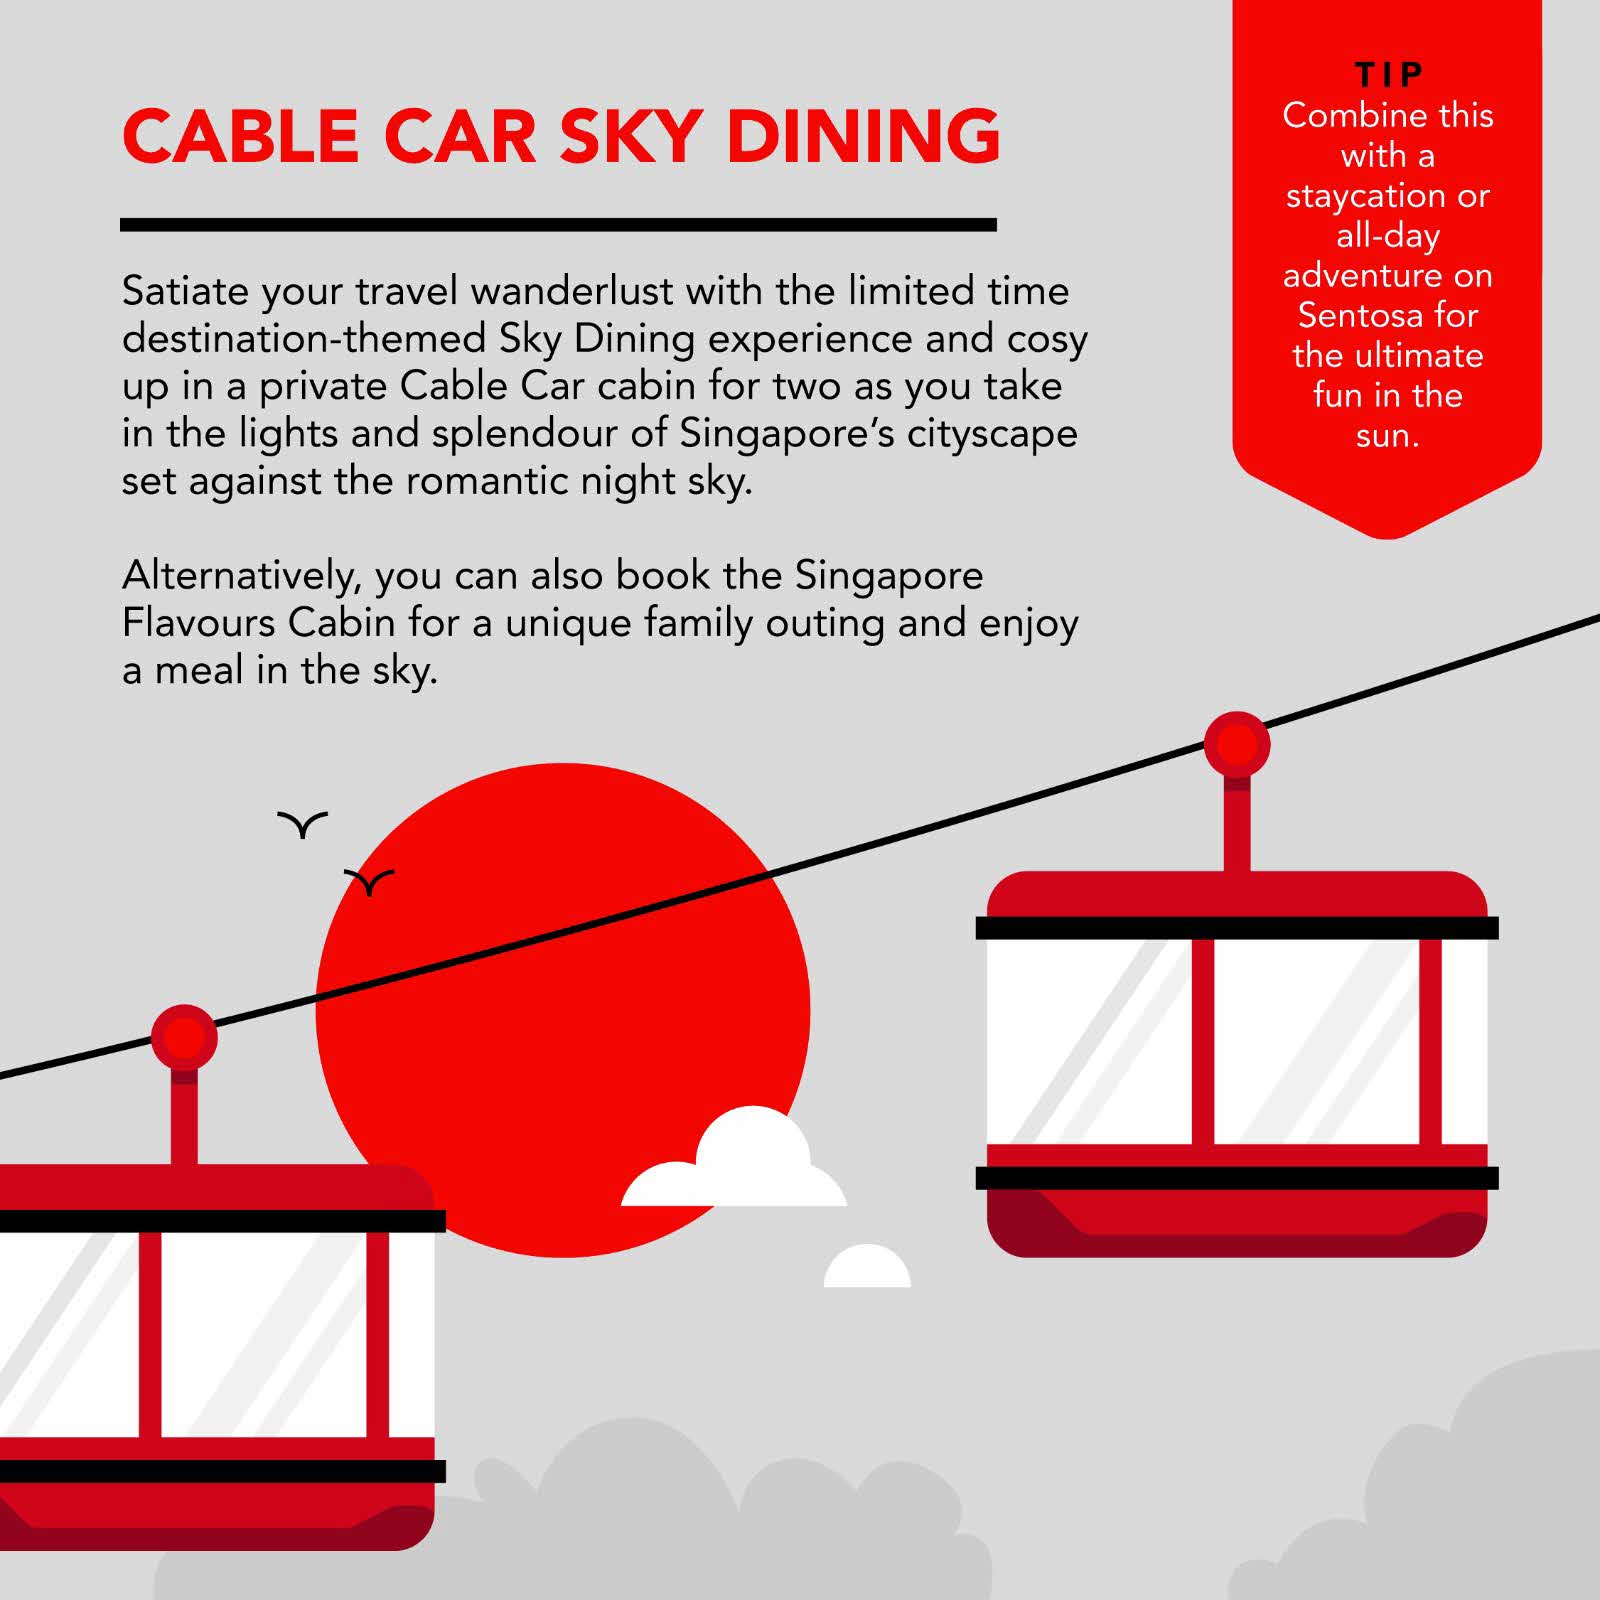 Cable car sky dining